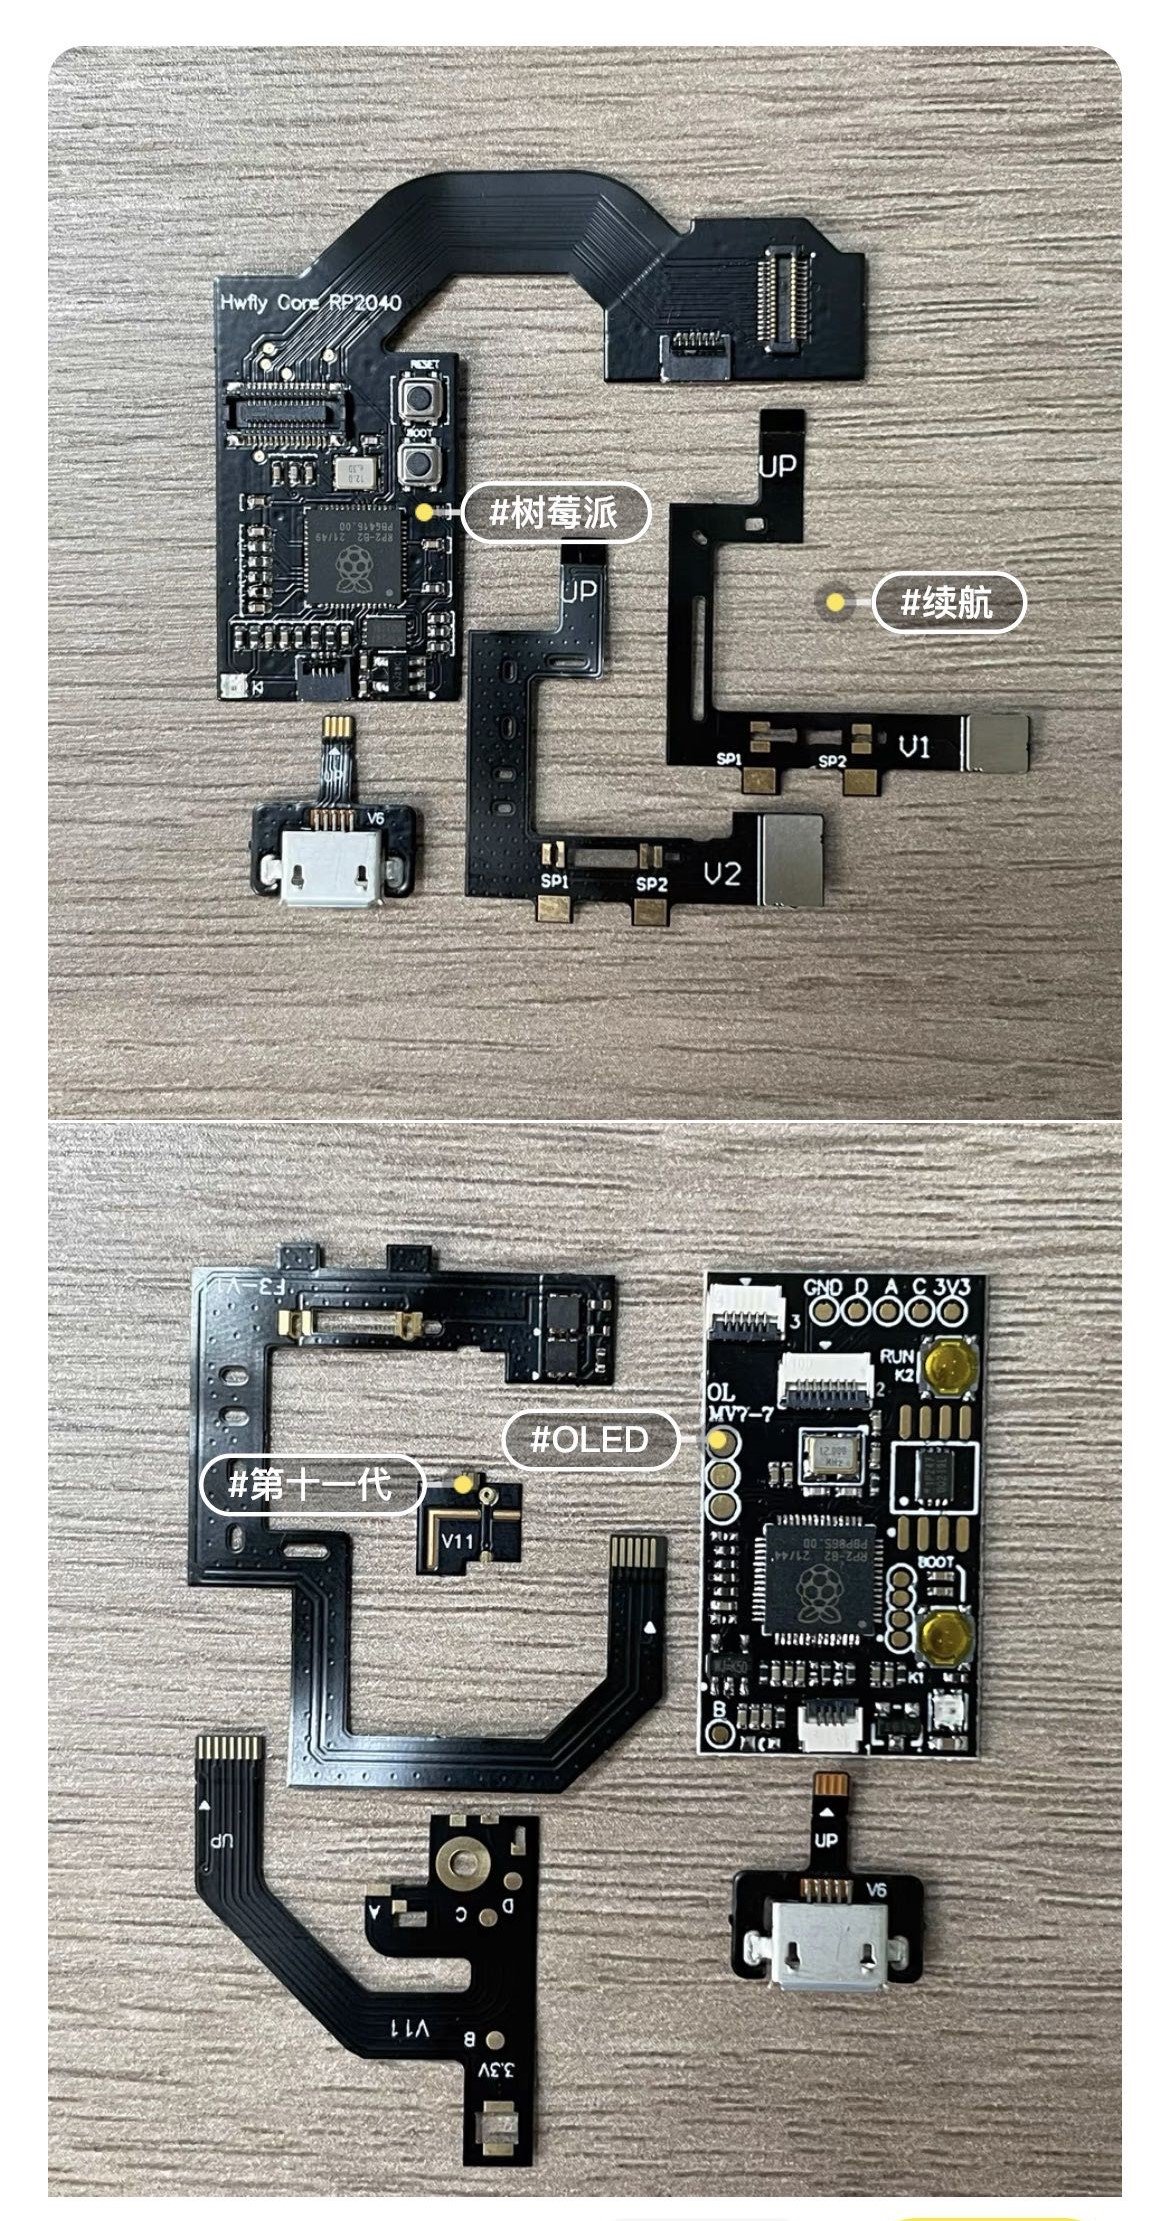 HWfly-shaped Picofly boards start shipping in China | GBAtemp.net - The  Independent Video Game Community